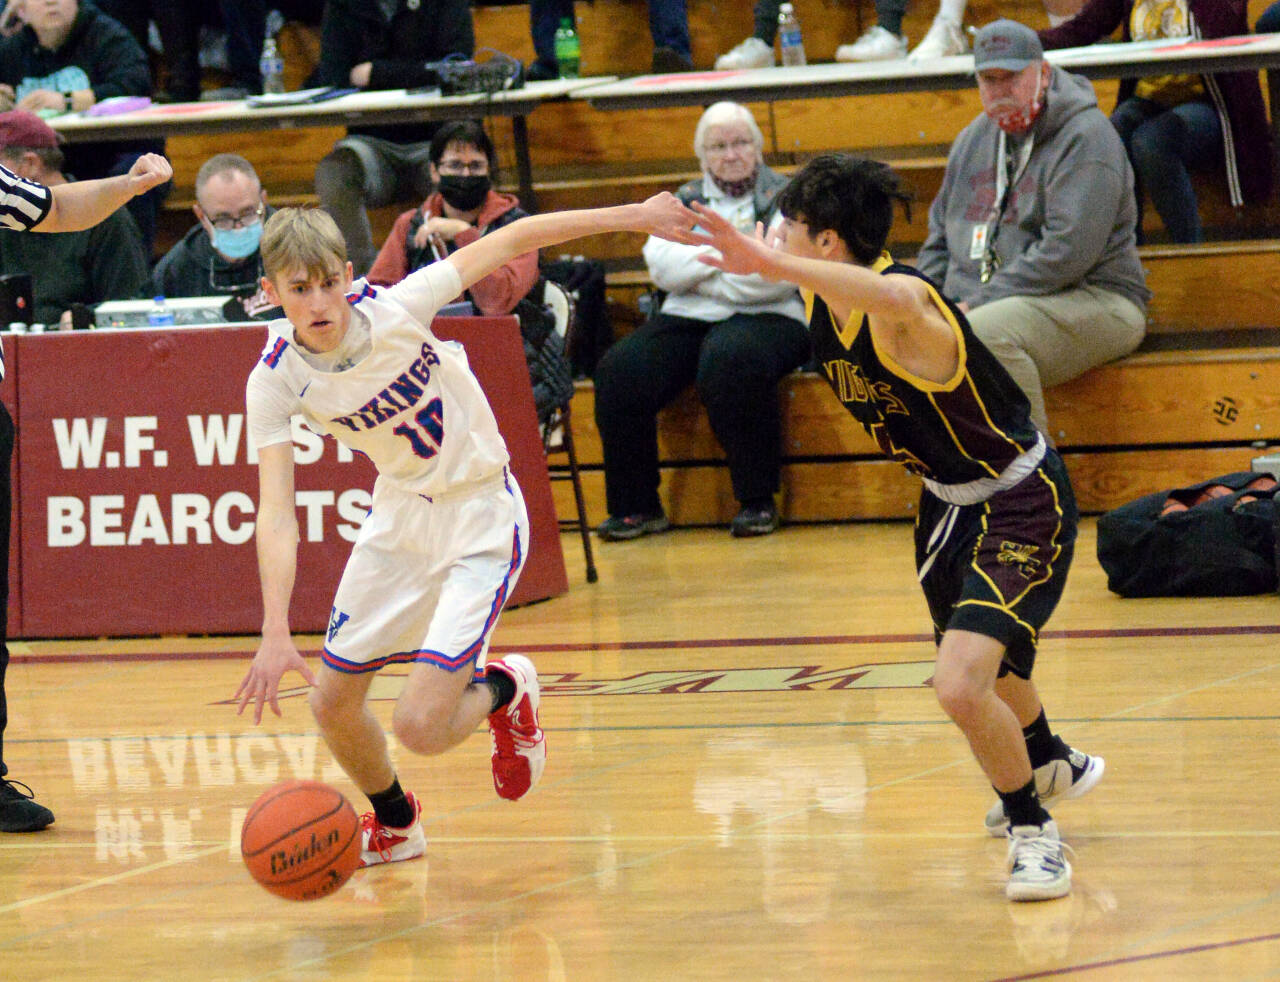 RYAN SPARKS | THE DAILY WORLD Willapa Valley guard Riley Pearson (10) is defended by Sunnyside Christian’s Jaden Jech during the Vikings’ 65-59 victory in a 1B Regional round game on Saturday at WF West High School in Chehalis.